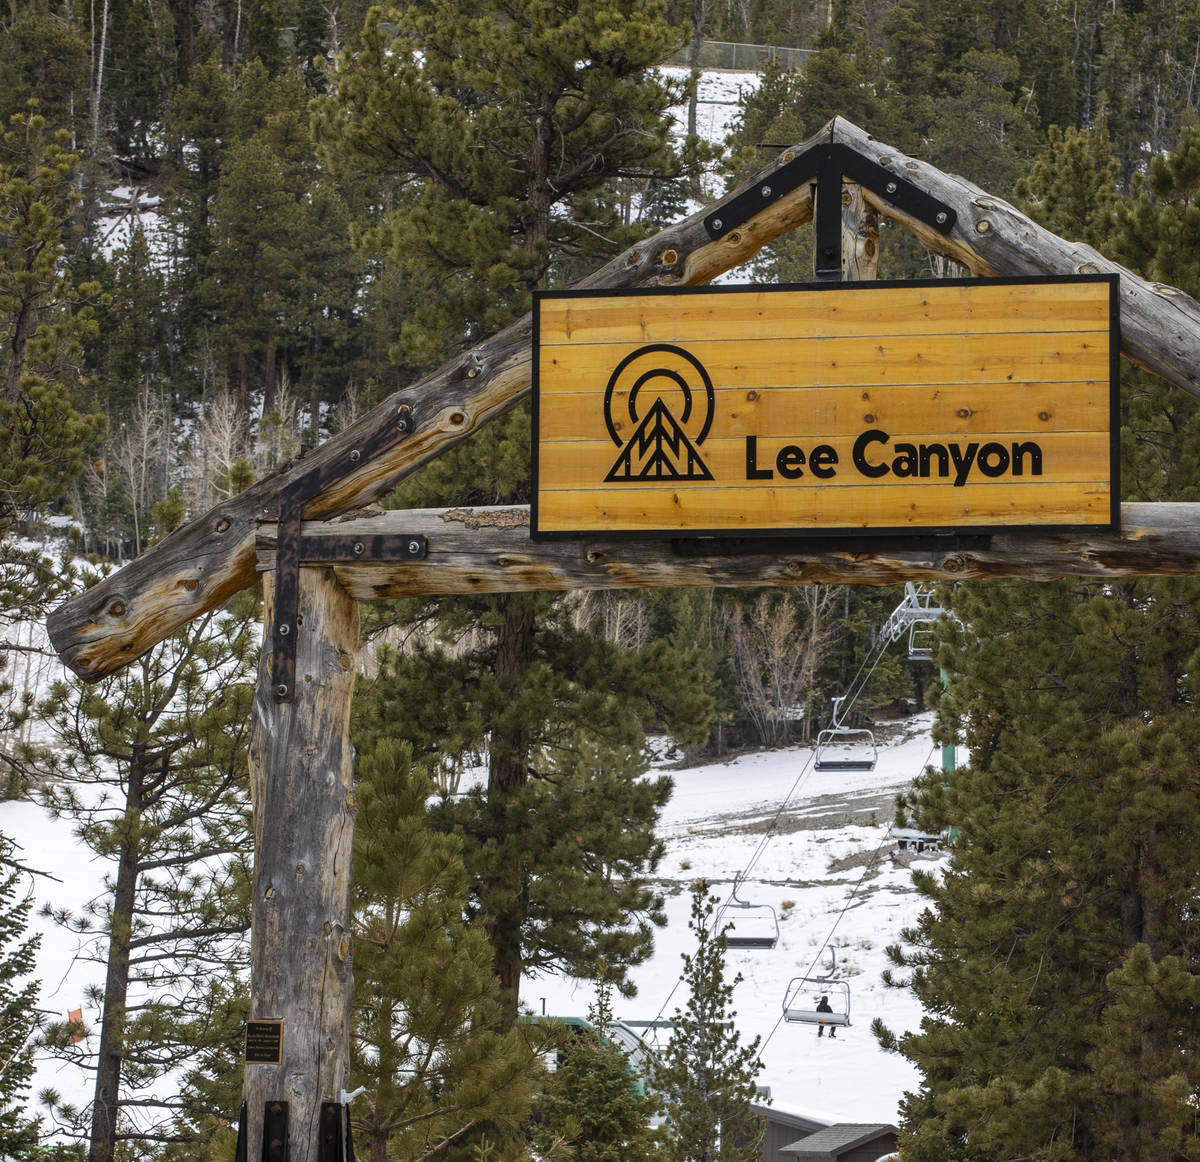 Opening day of skiing and snowboarding at Lee Canyon has two runs open with more snow hopefully ...